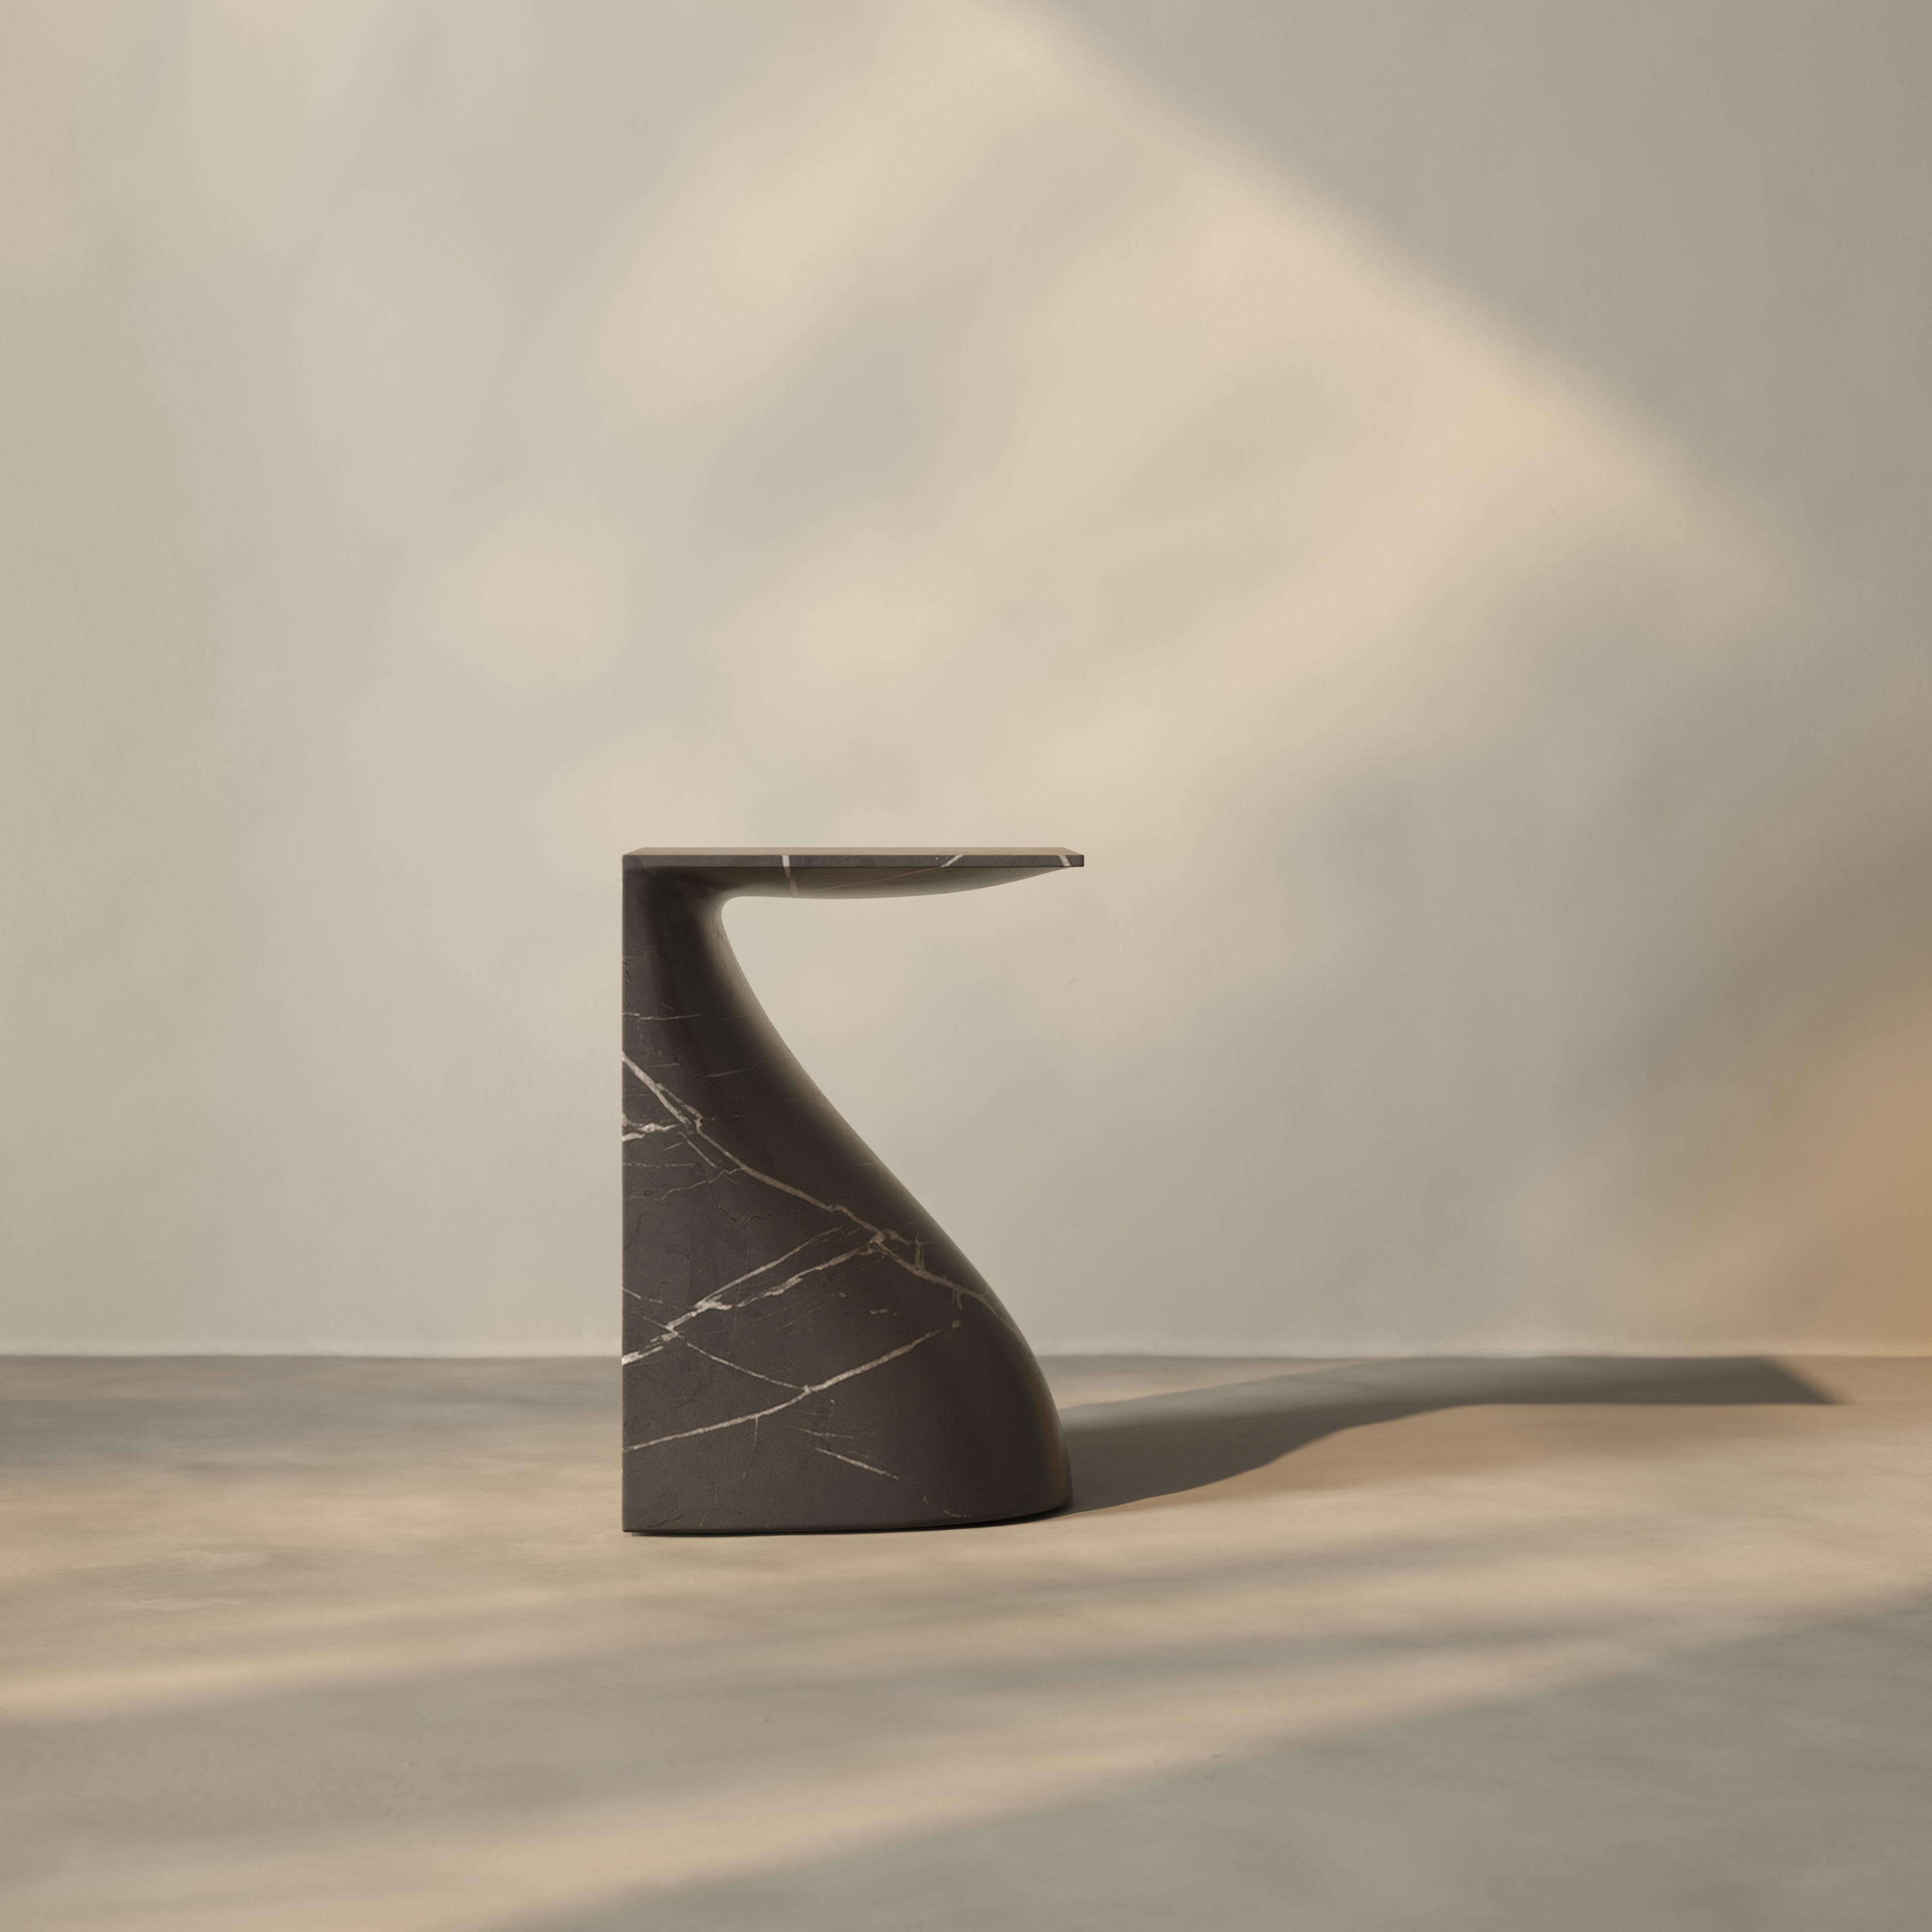 Ula Pull Up Table by Veronica Mar